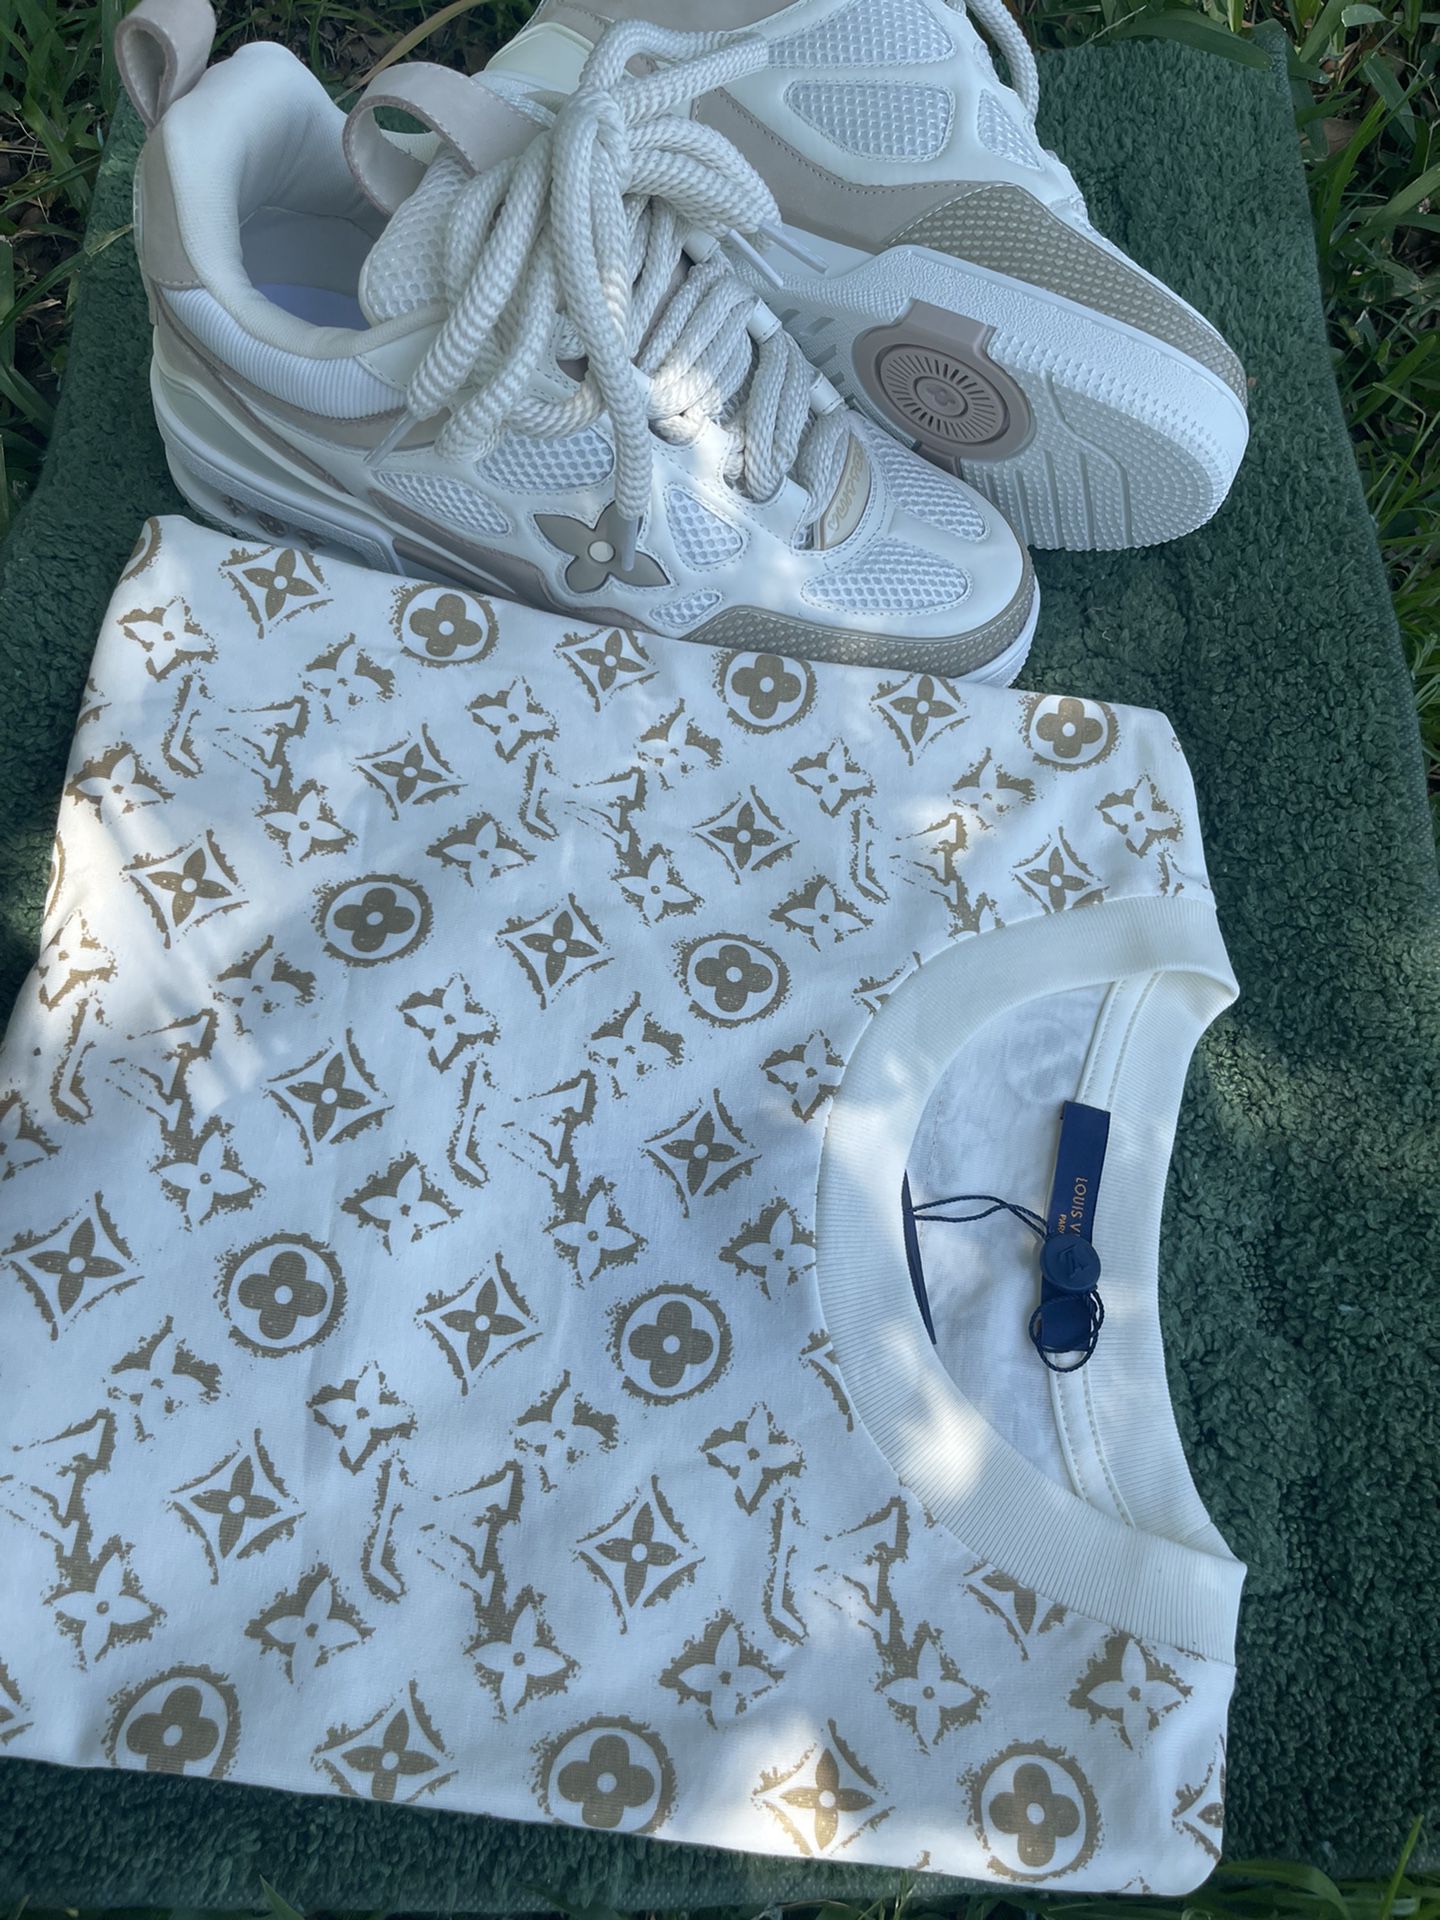 Louis Vuitton Mens Christian Lady's Clothing Chanel Sneakers Gucci Polo  Shirts Burberry Trunks Lv Shorts for Sale in Miami Beach, FL - OfferUp